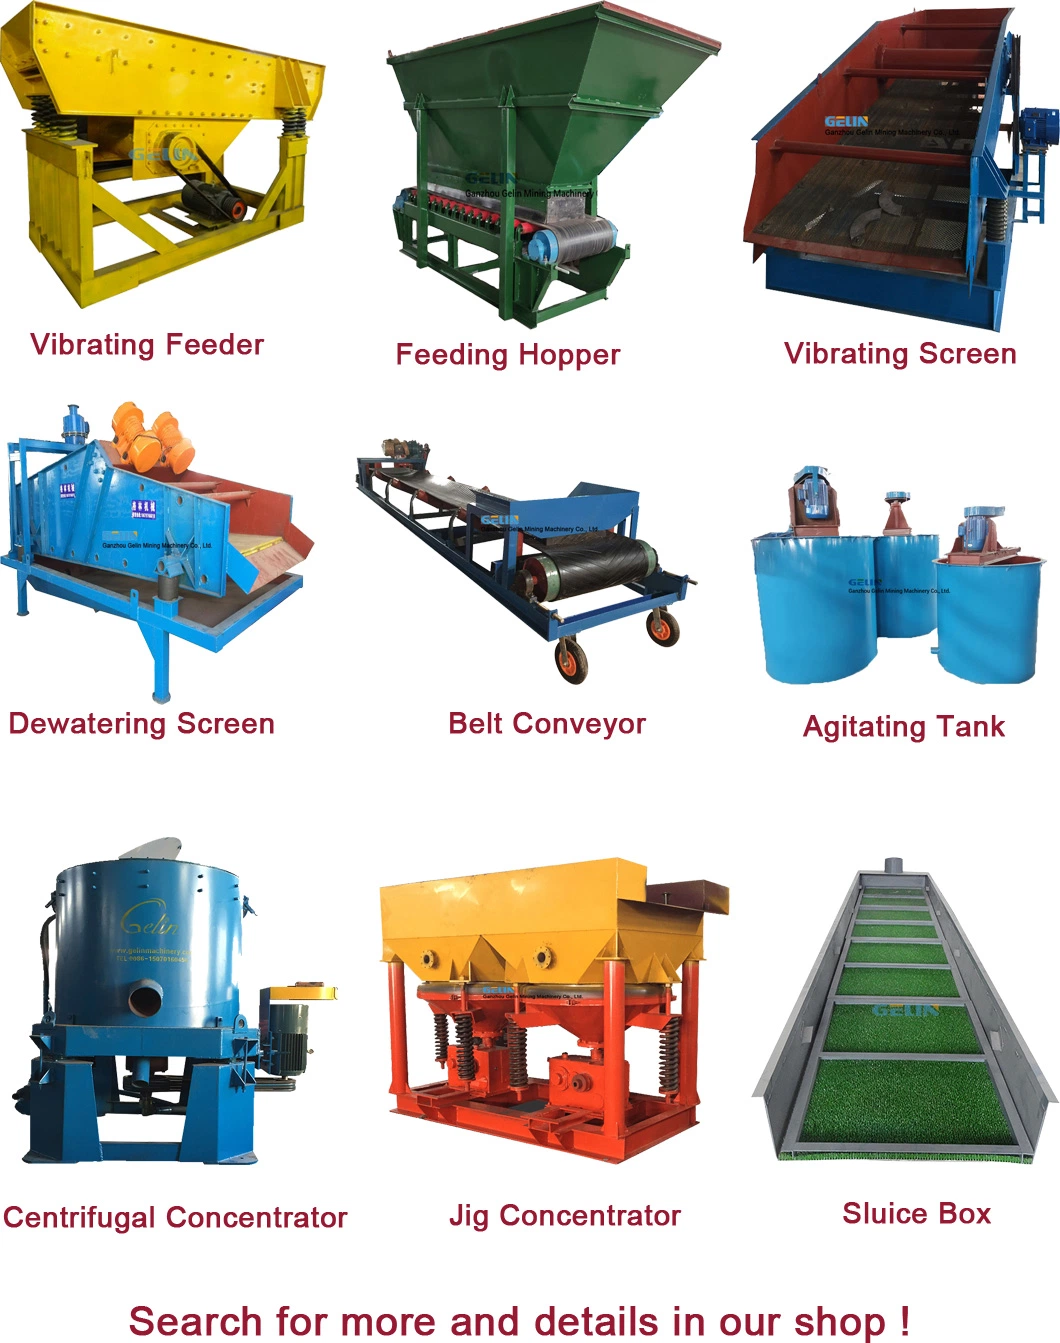 Hot Sale Hydrocyclone Sand Clay Separator Without Power